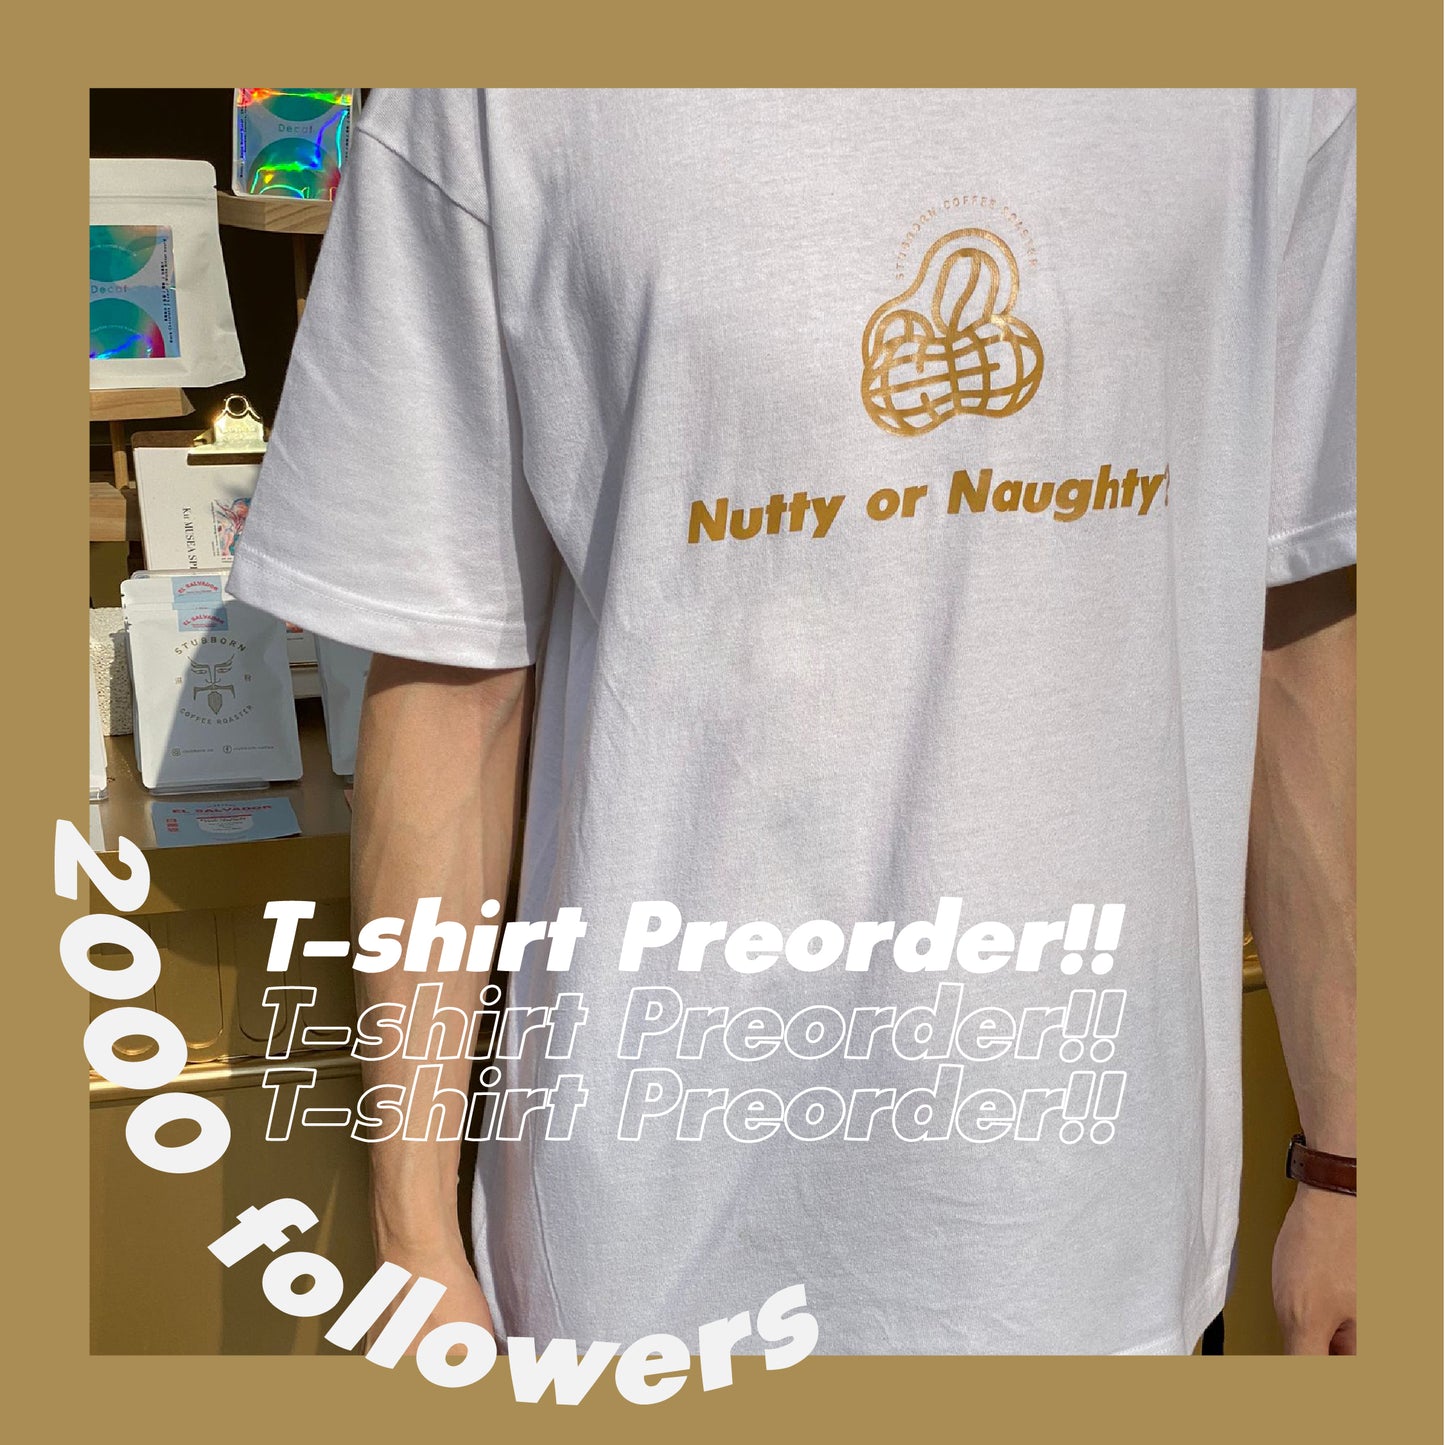 Nutty or Naughty T-shirt